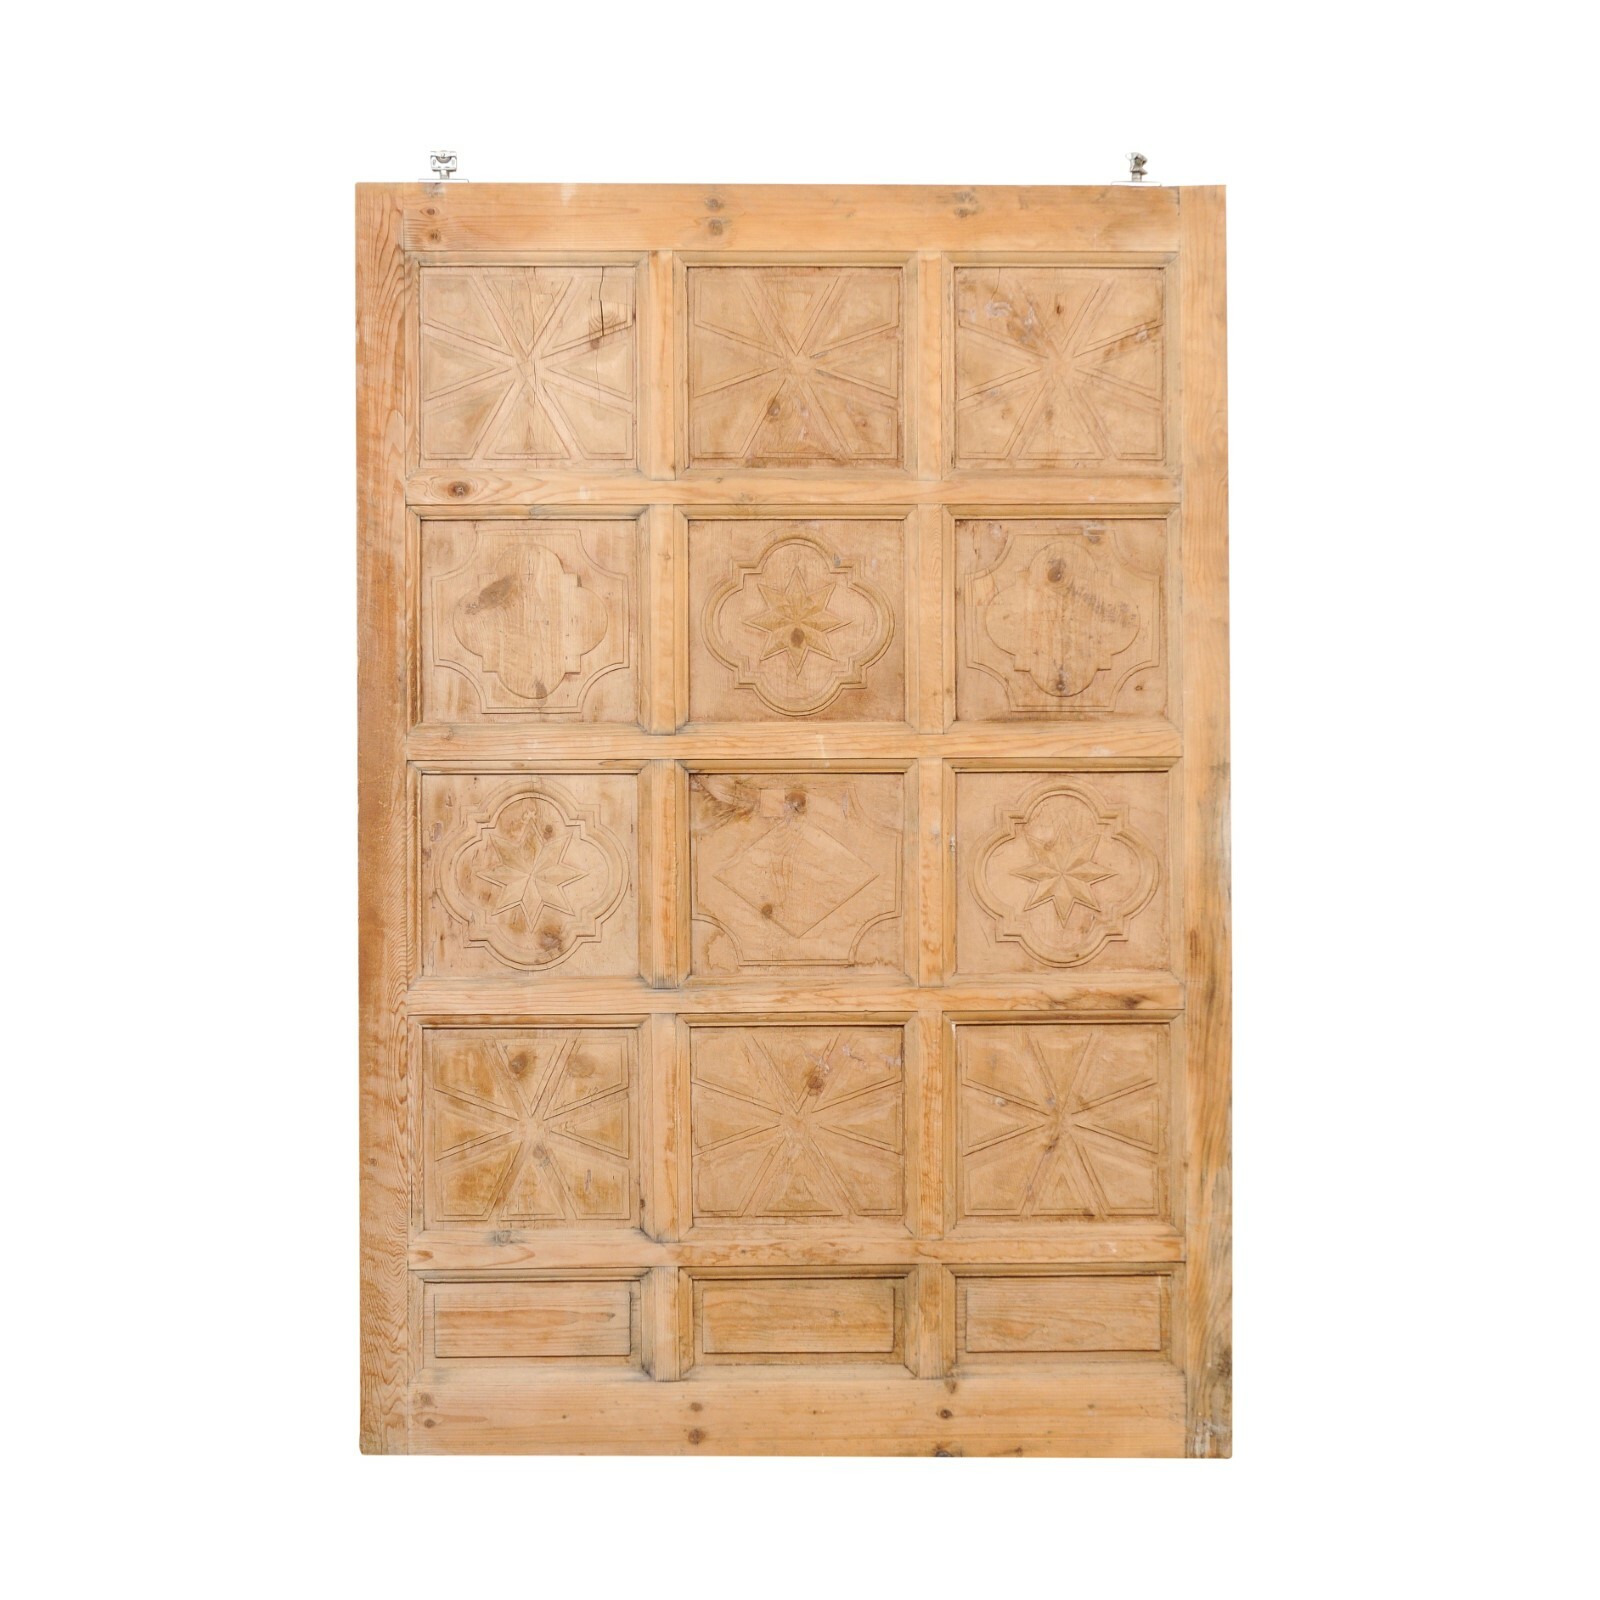 A Large Spanish Carved-Wood 15 Panel Door